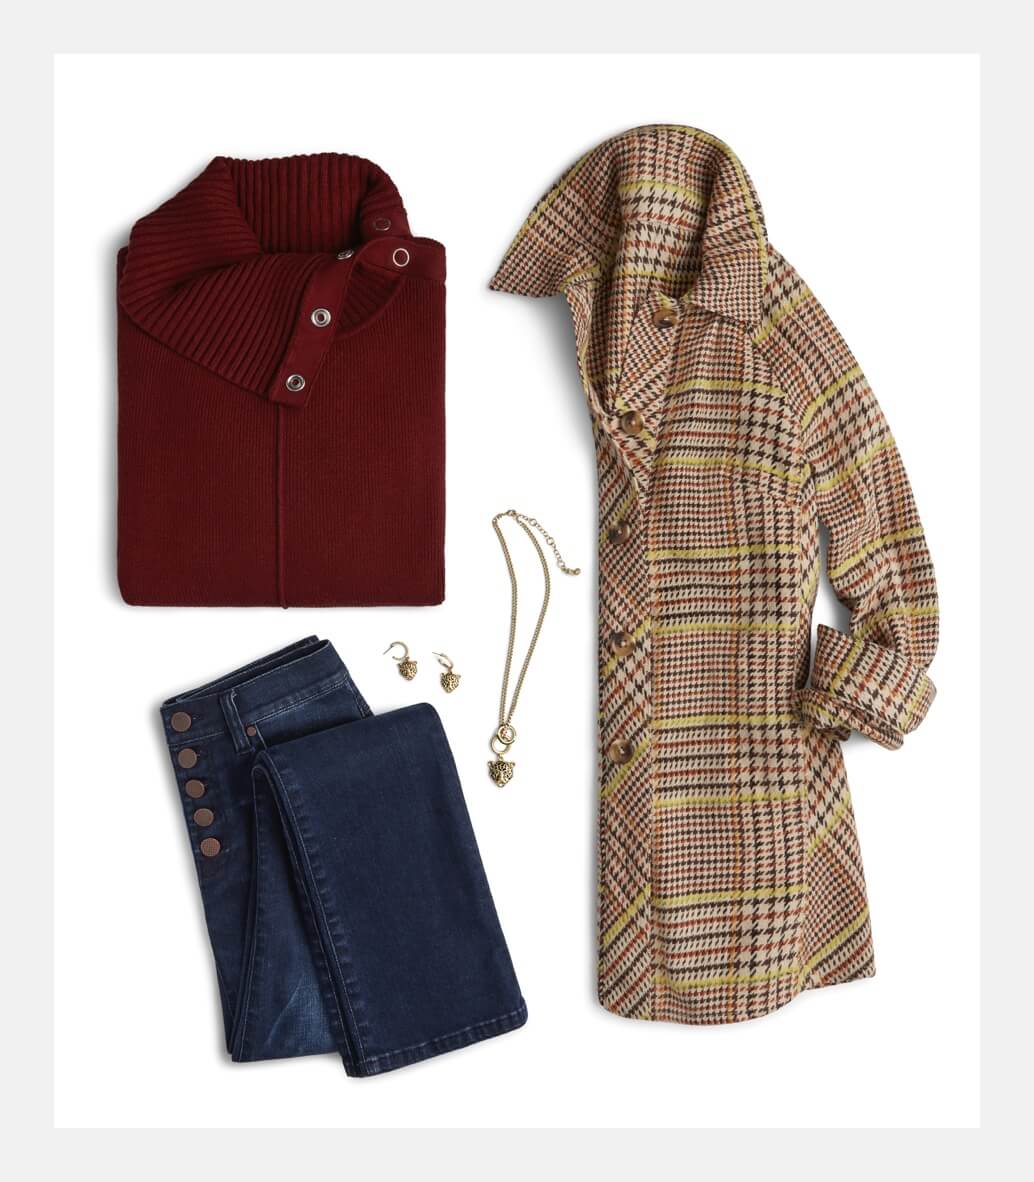 Flatlay of outfit featuring Pushover Pullover in Firebrick, Button Fly Straight in Indigo Wash, Yorkshire Shacket in Autumn Plaid, Jaguar Necklace in Gold, and Jaguar Earrings in Gold.